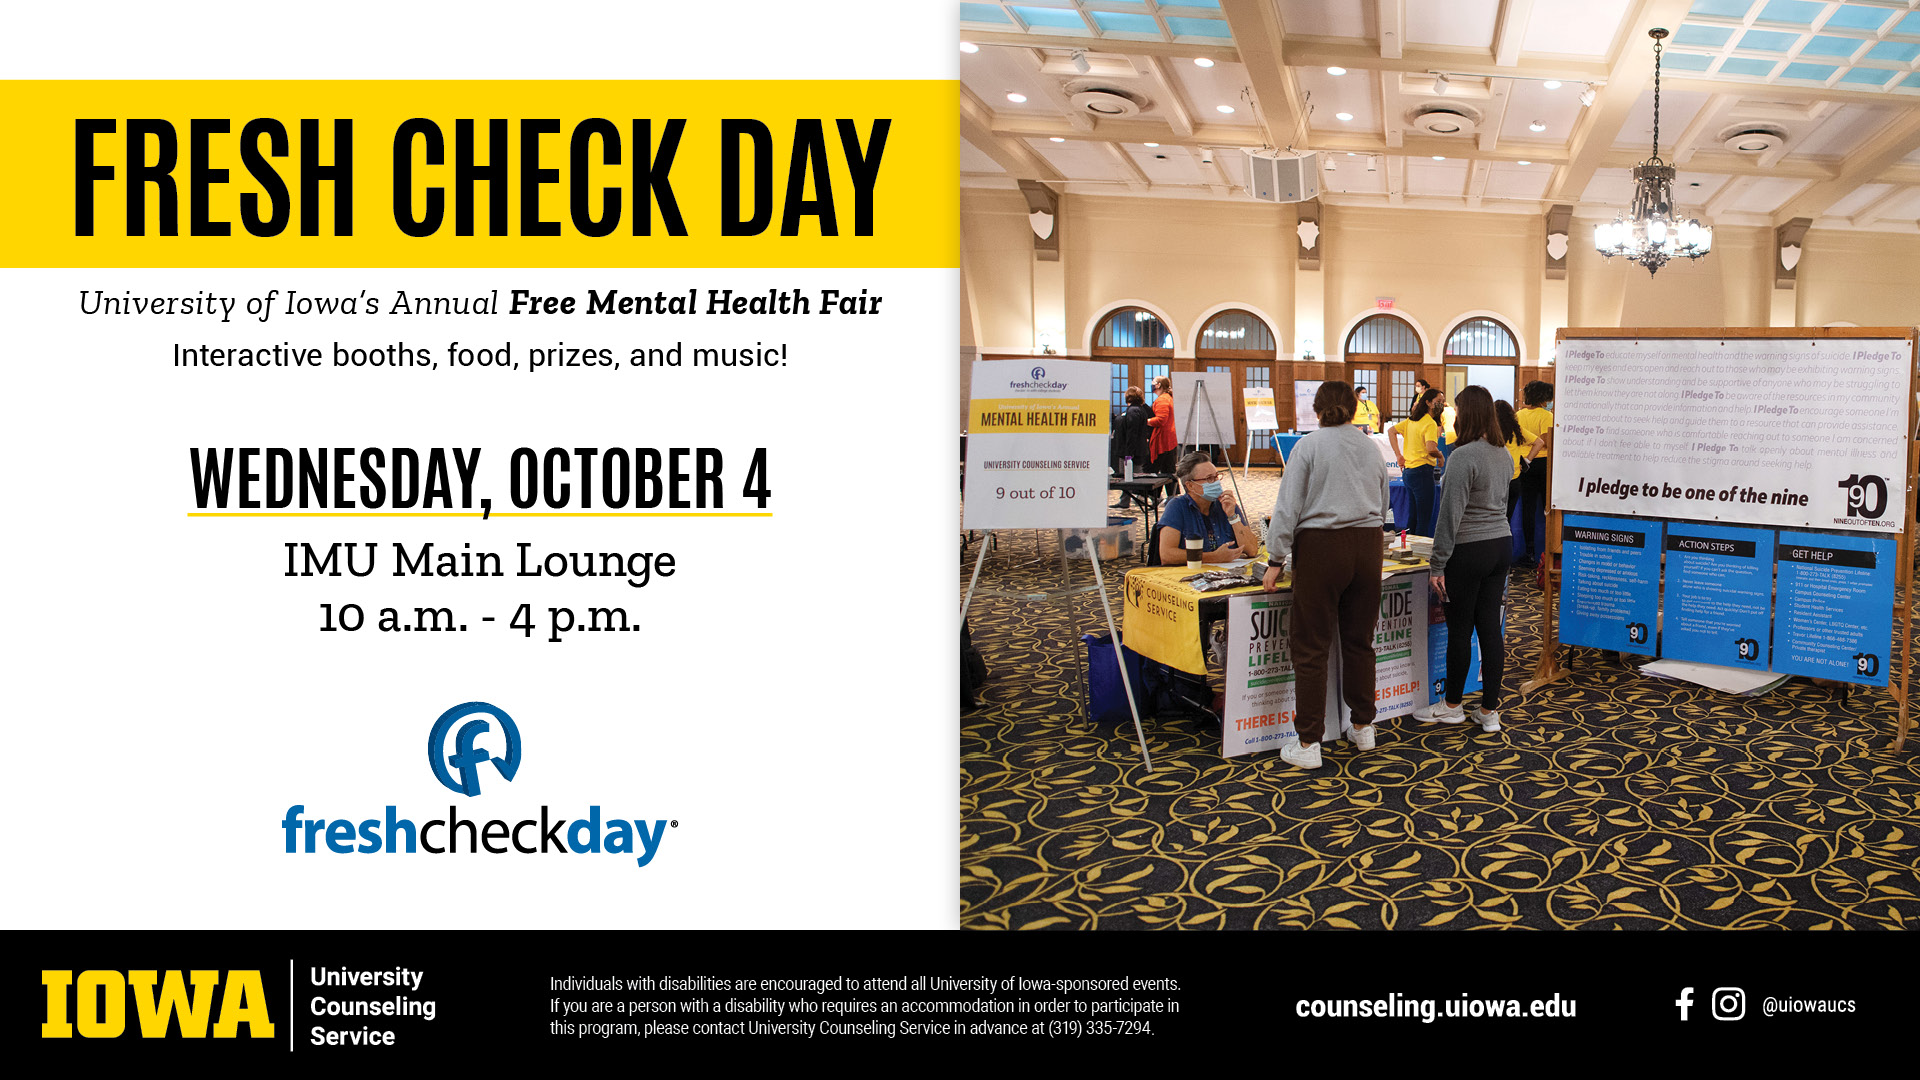 Fresh Check Day; University of Iowa's Annual Free Mental Health Fair; Interactive booths, food, prizes, and music! Wednesday, October 4; IMU Main Lounge; 10 a.m. - 4 p.m.